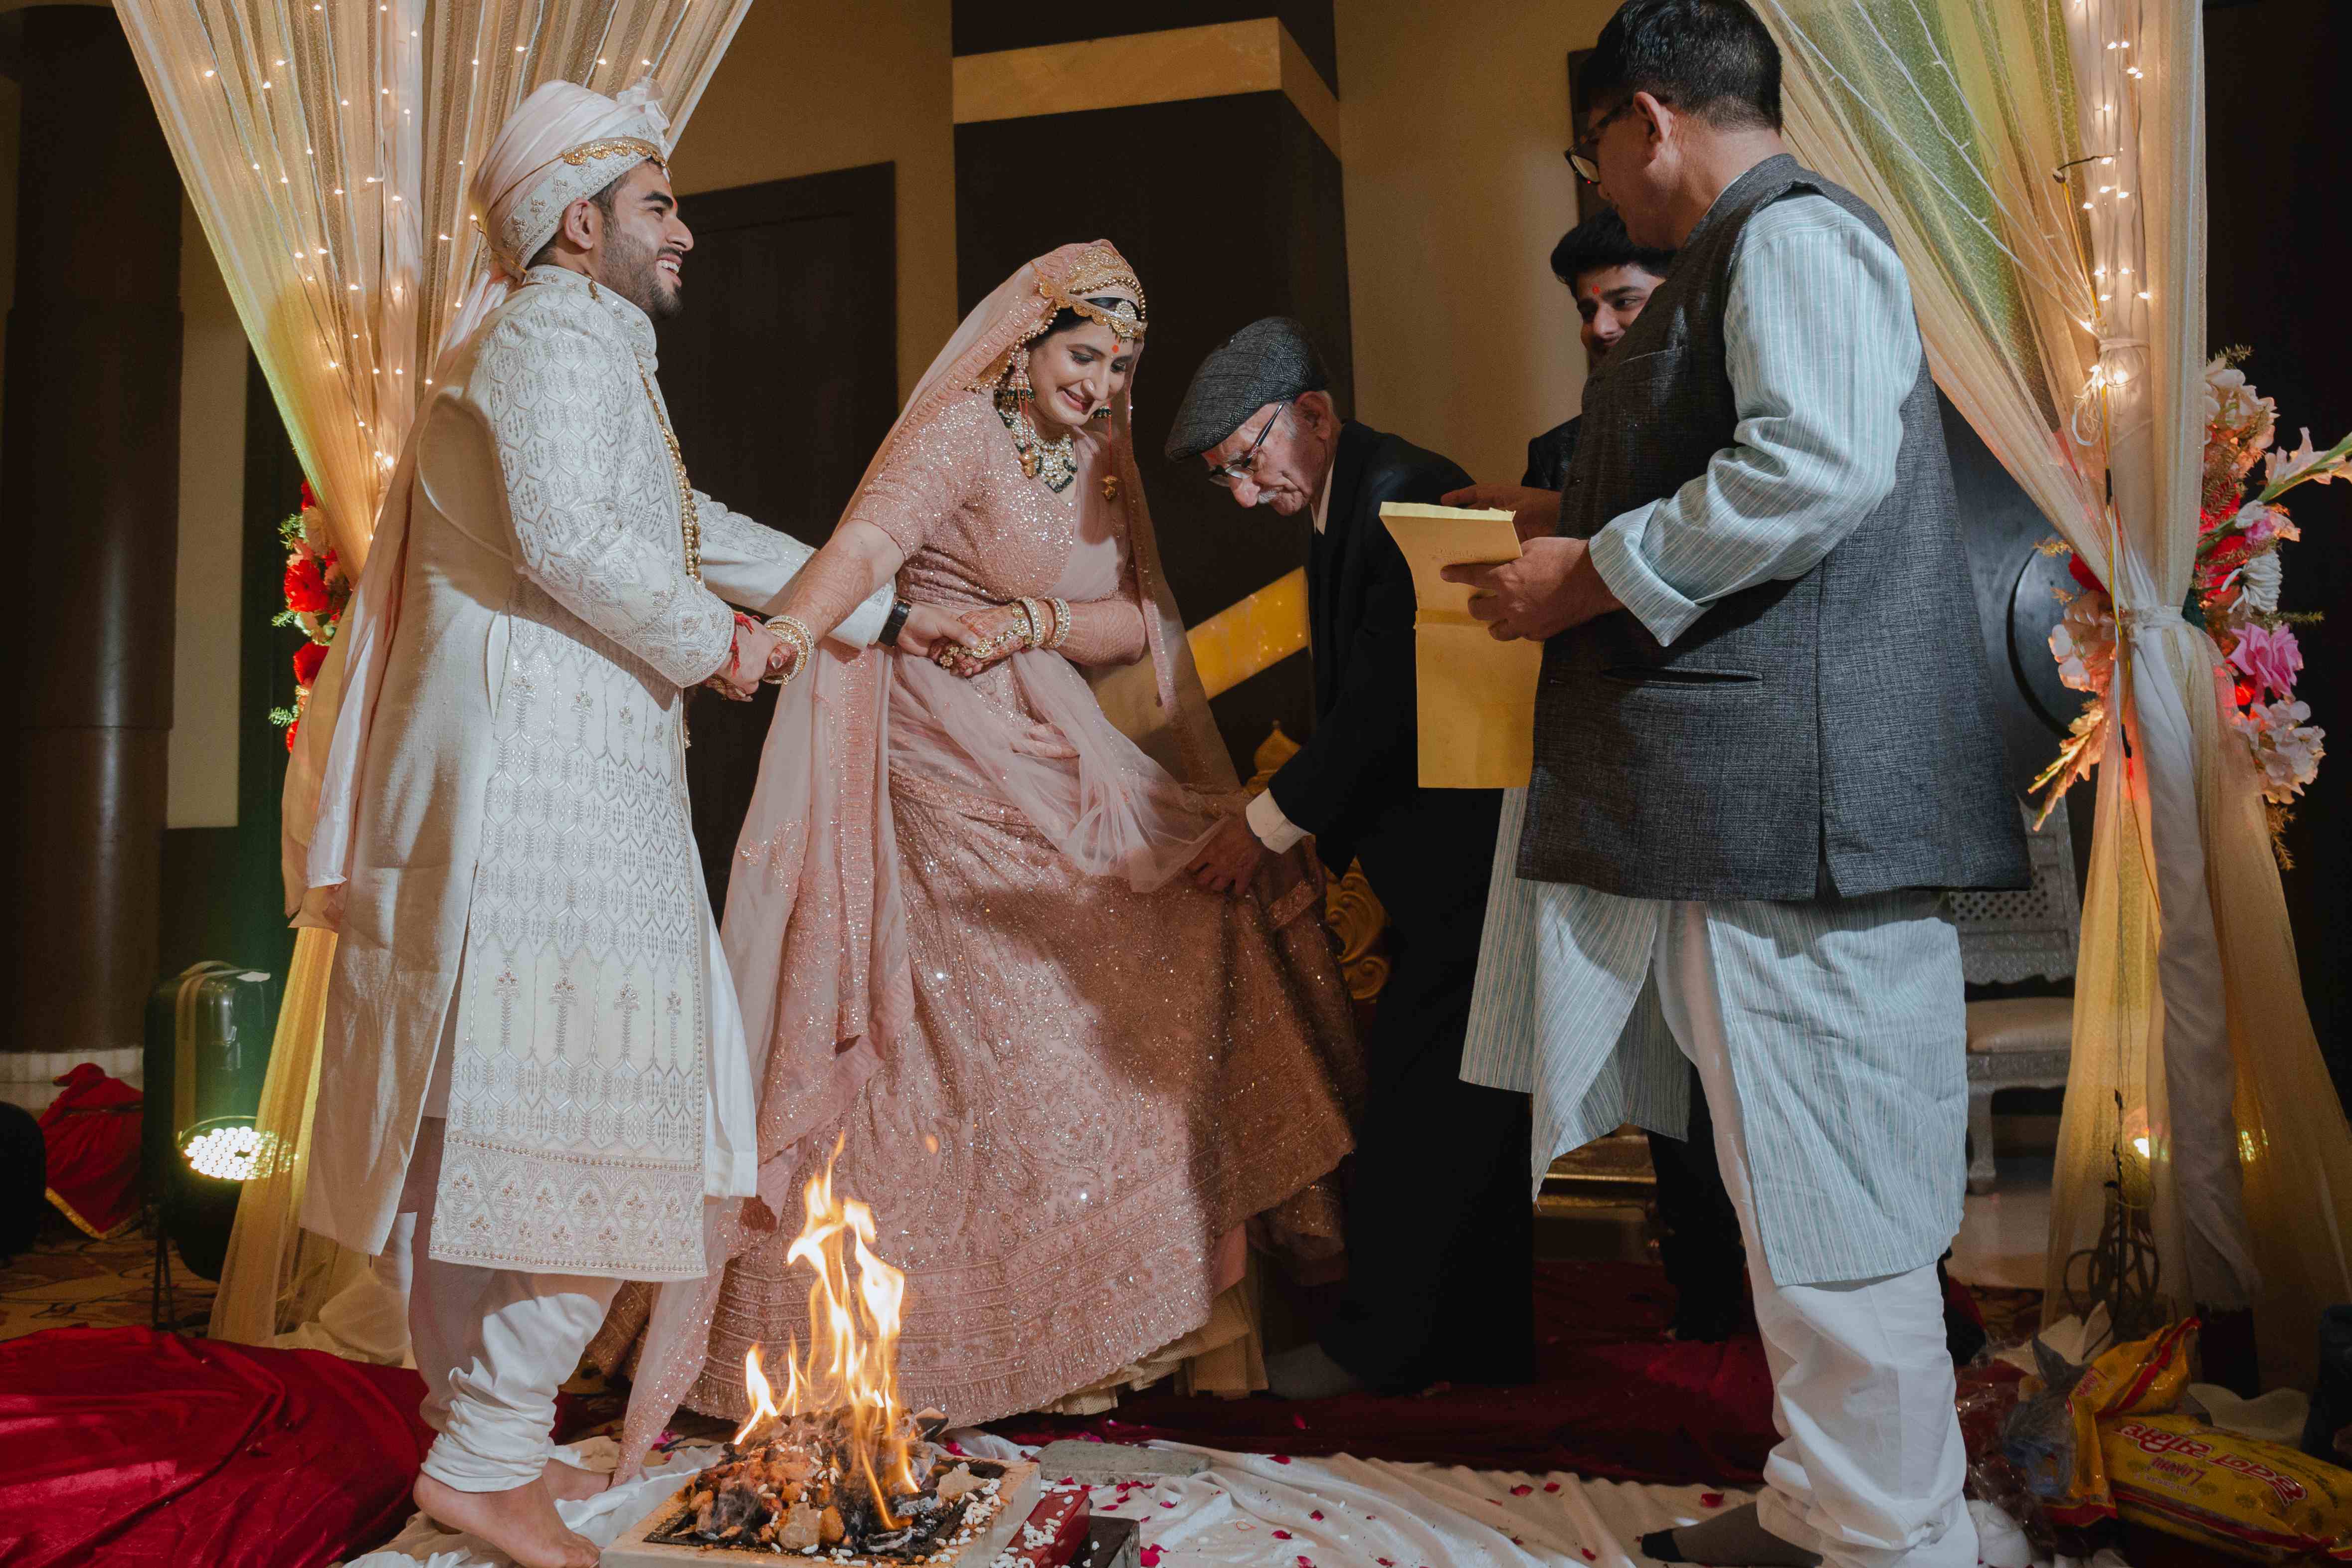 Know About All The Beautiful Kashmiri Traditions With This Couple’s Wedding